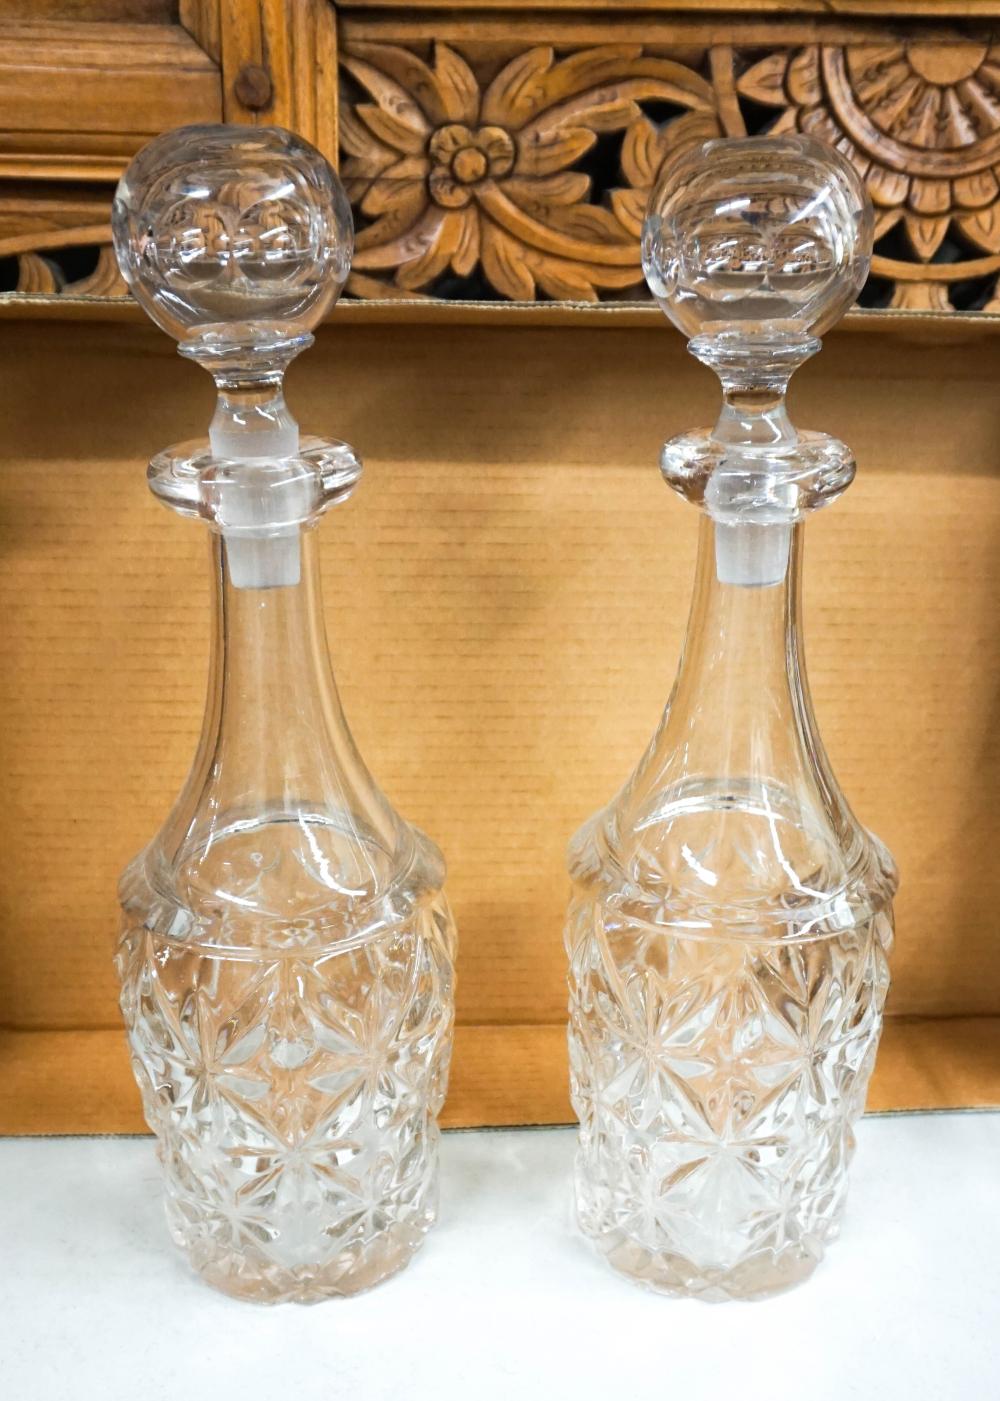 PAIR OF MOLDED GLASS DECANTERSPair